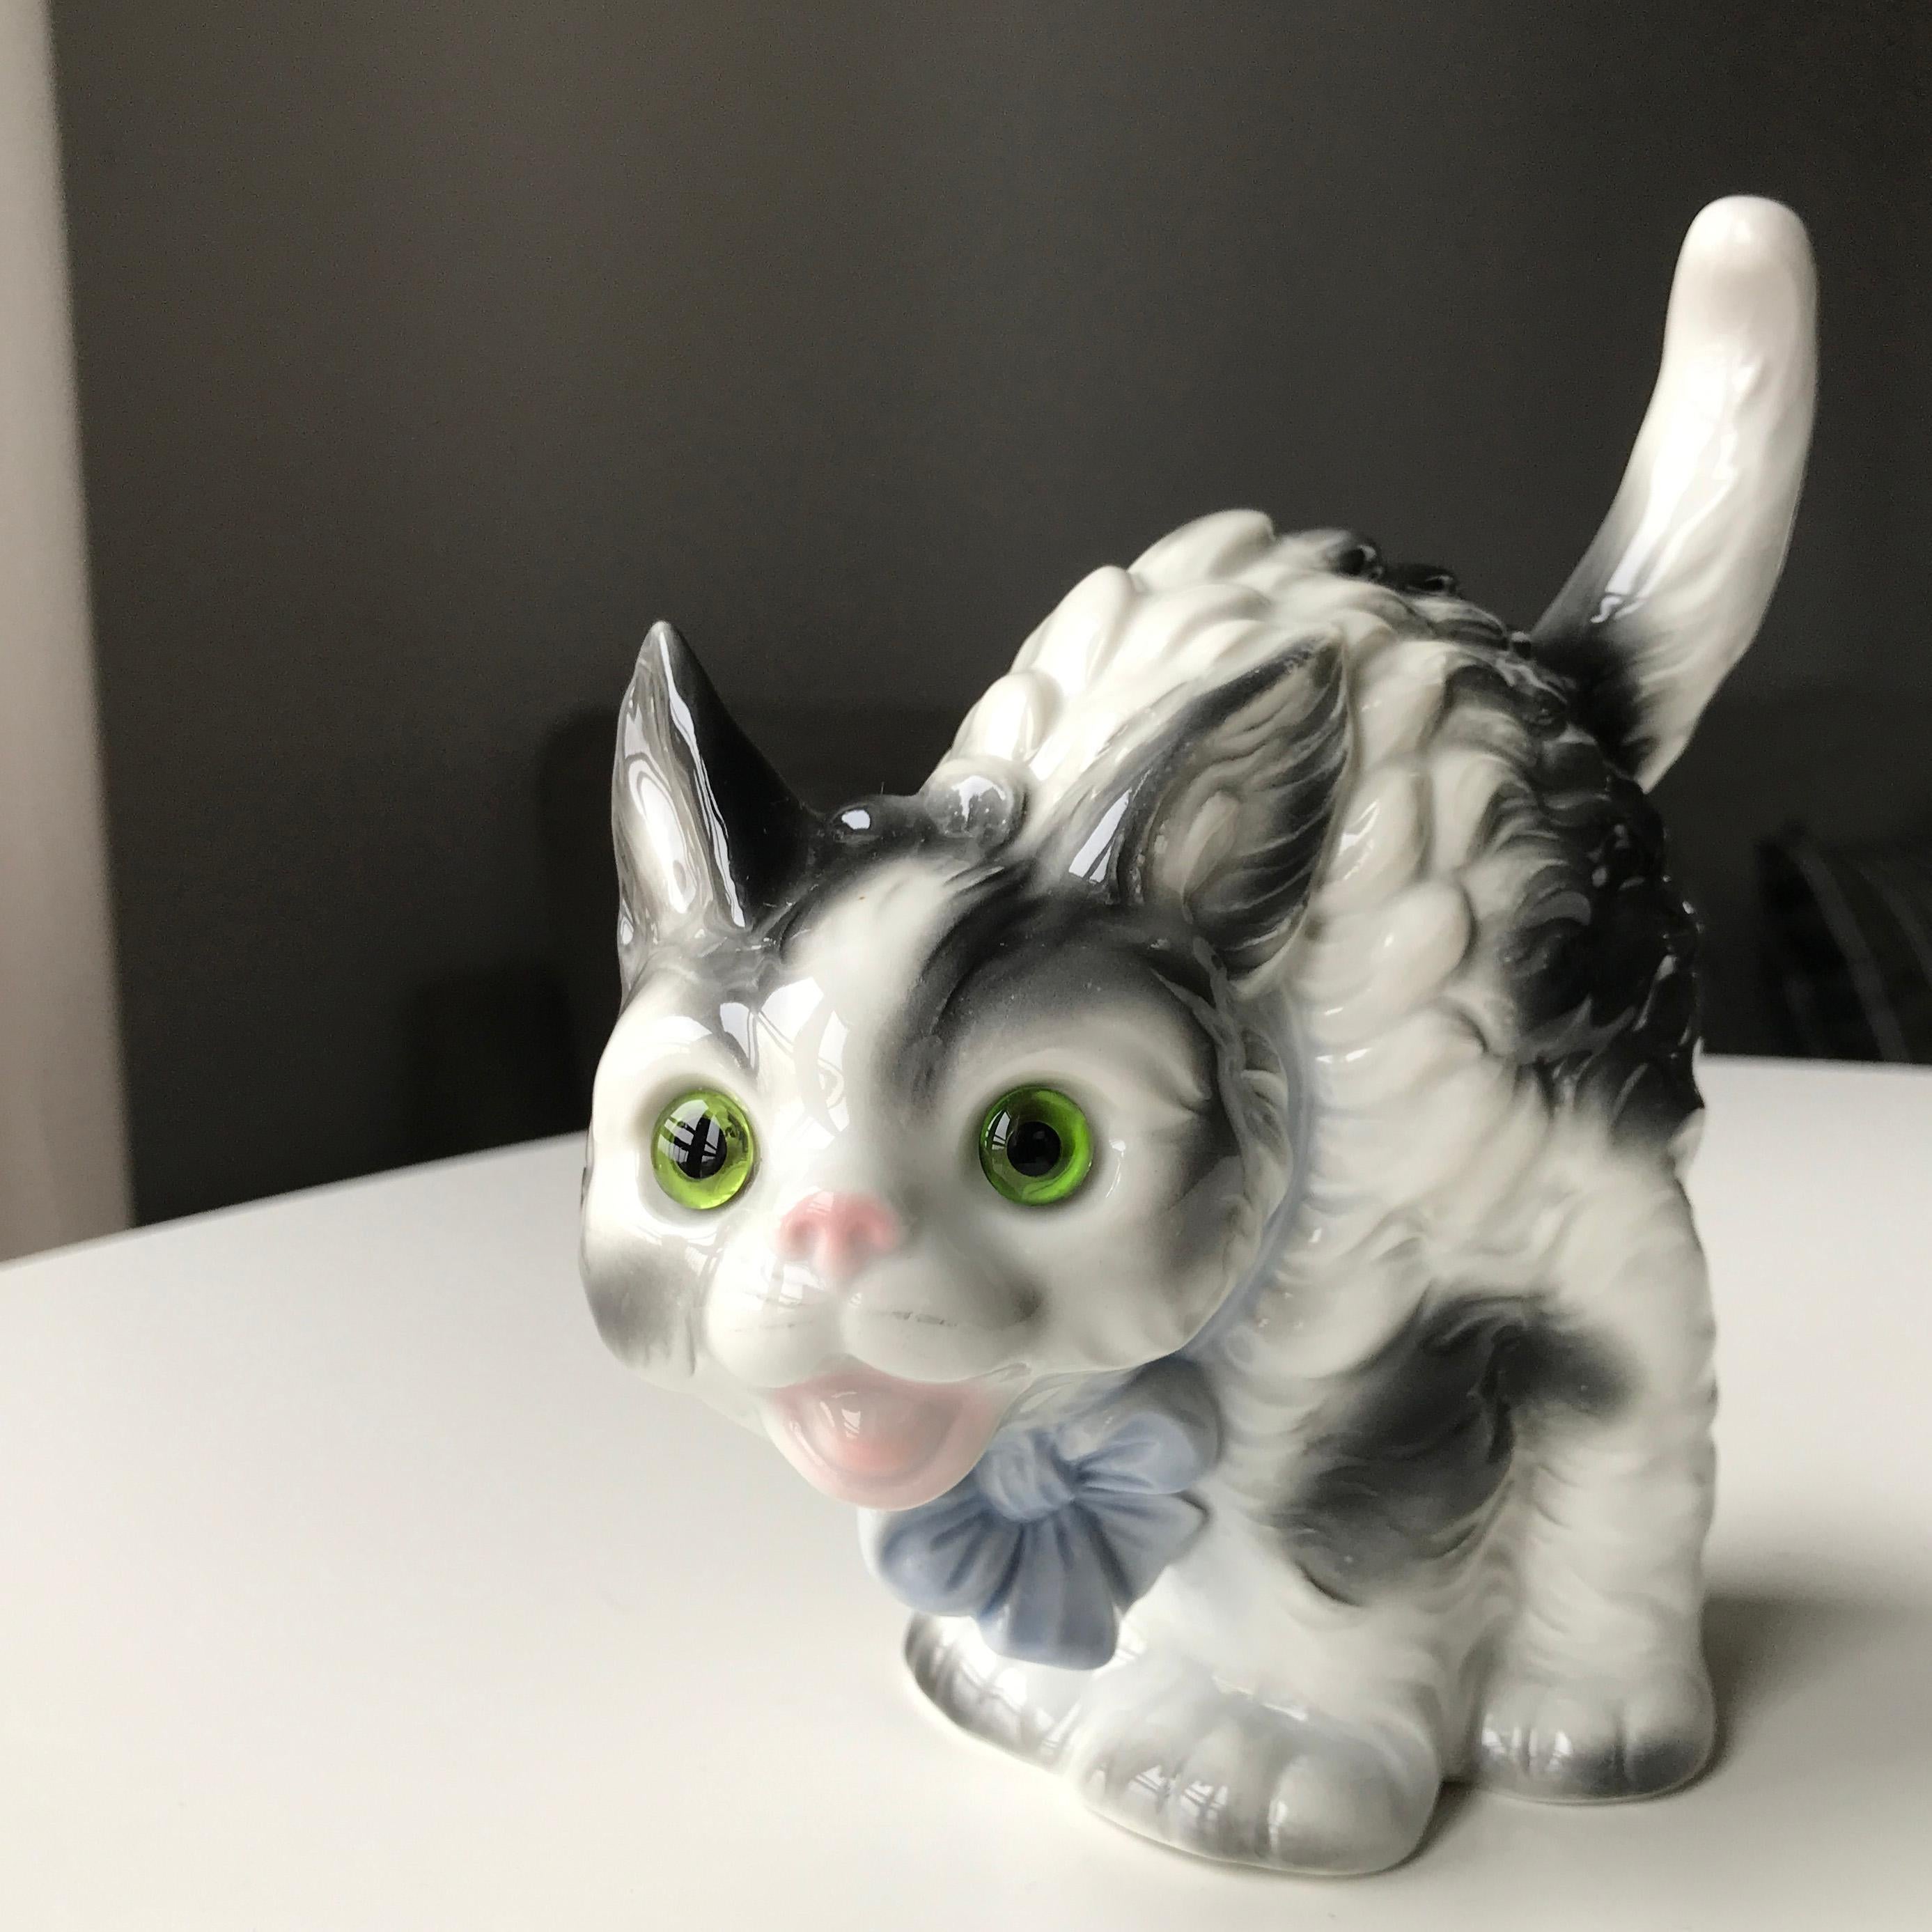 FREE SHIPPING! Lamp made as a porcelain multicolored figurine of a joyful cat manufactured in Germany in the beginning of the 20th century. Marked with logo. Electrically mounting by Danish Fog & Mørup. This figurine is part of a series of different